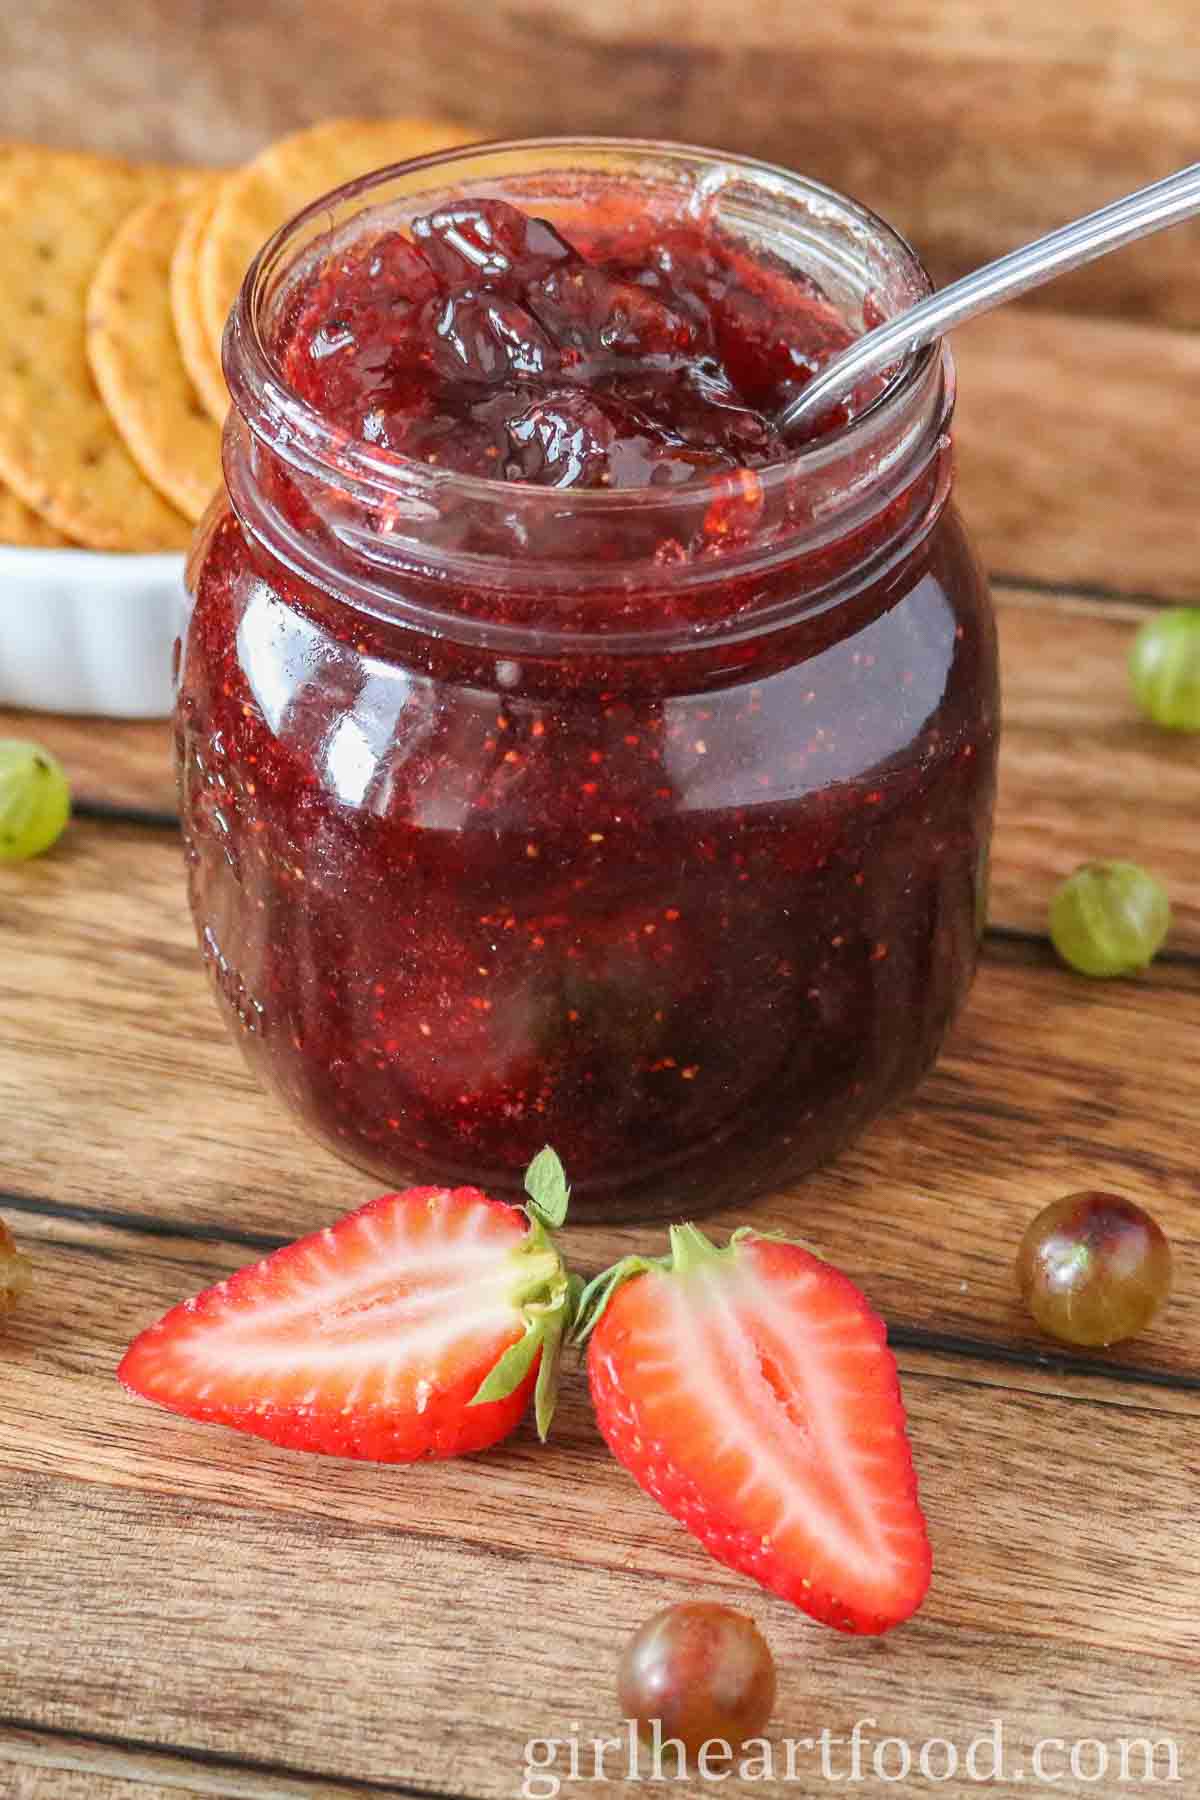 Jar of strawberry gooseberry jam with a spoon in it, next to some berries.